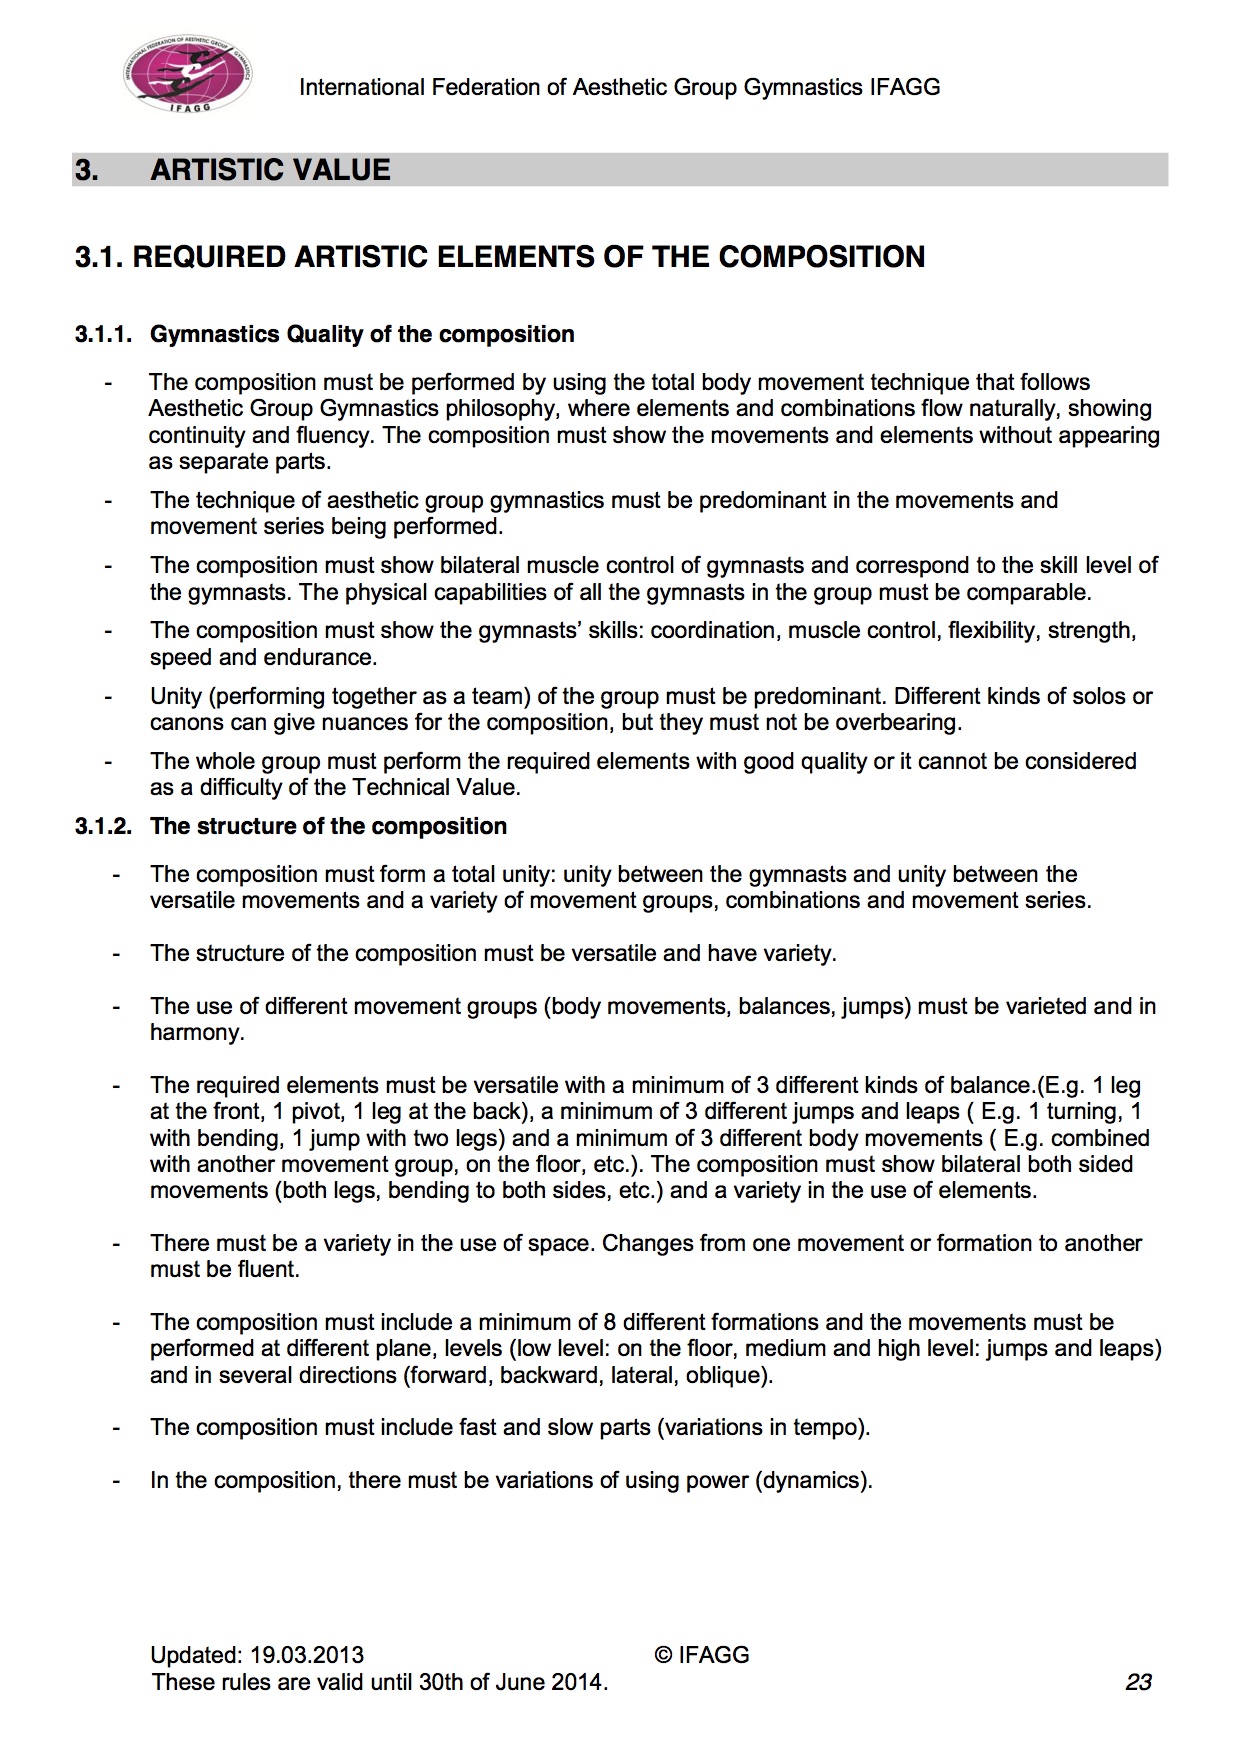 IFAGG Competition rules23.jpg